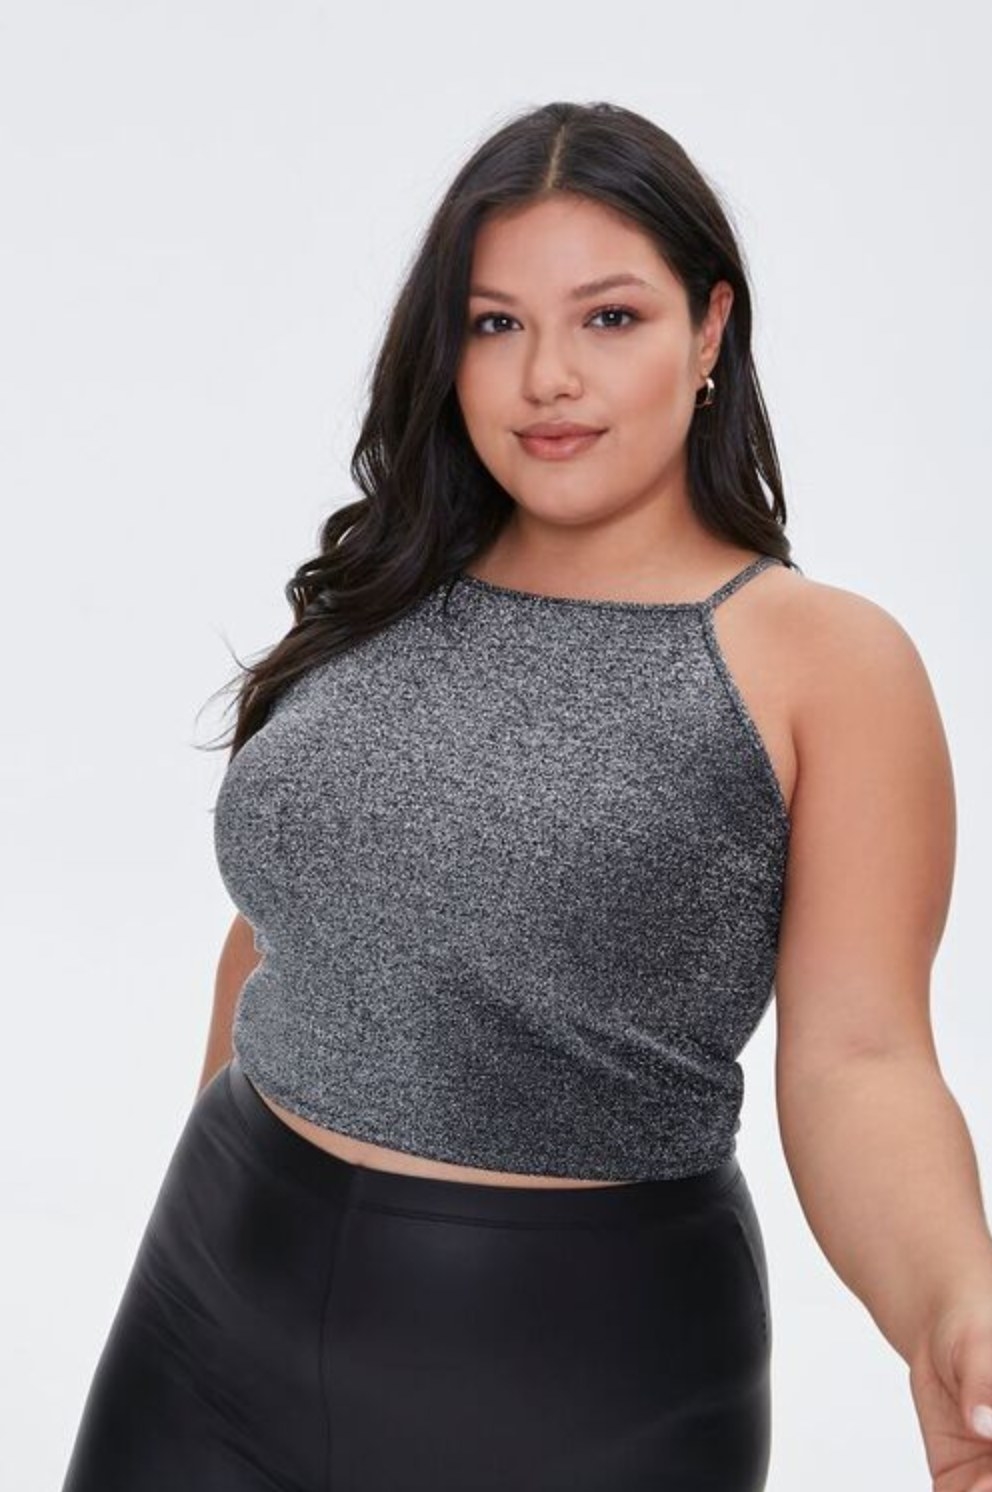 Model wearing the top